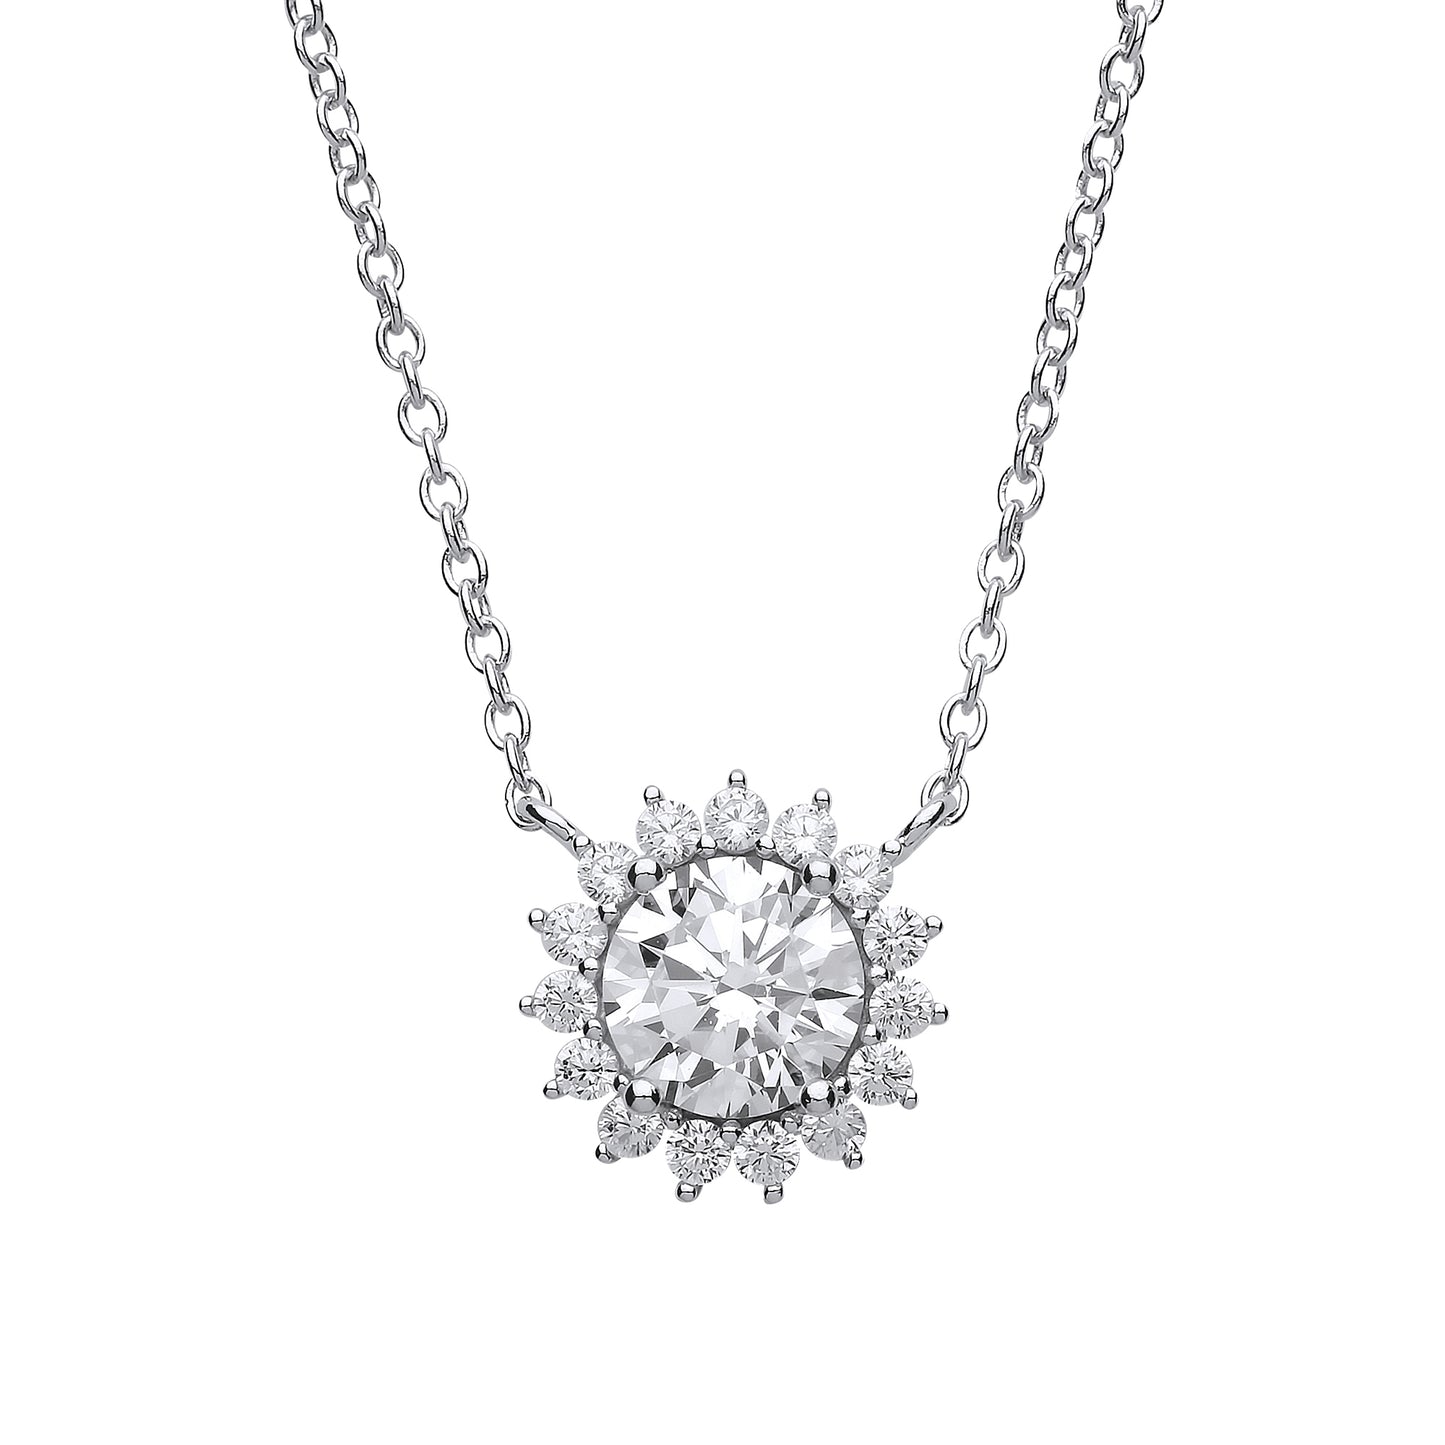 Silver  CZ Sunshine Cluster Solitaire Charm Necklace 16 inch - GVK170